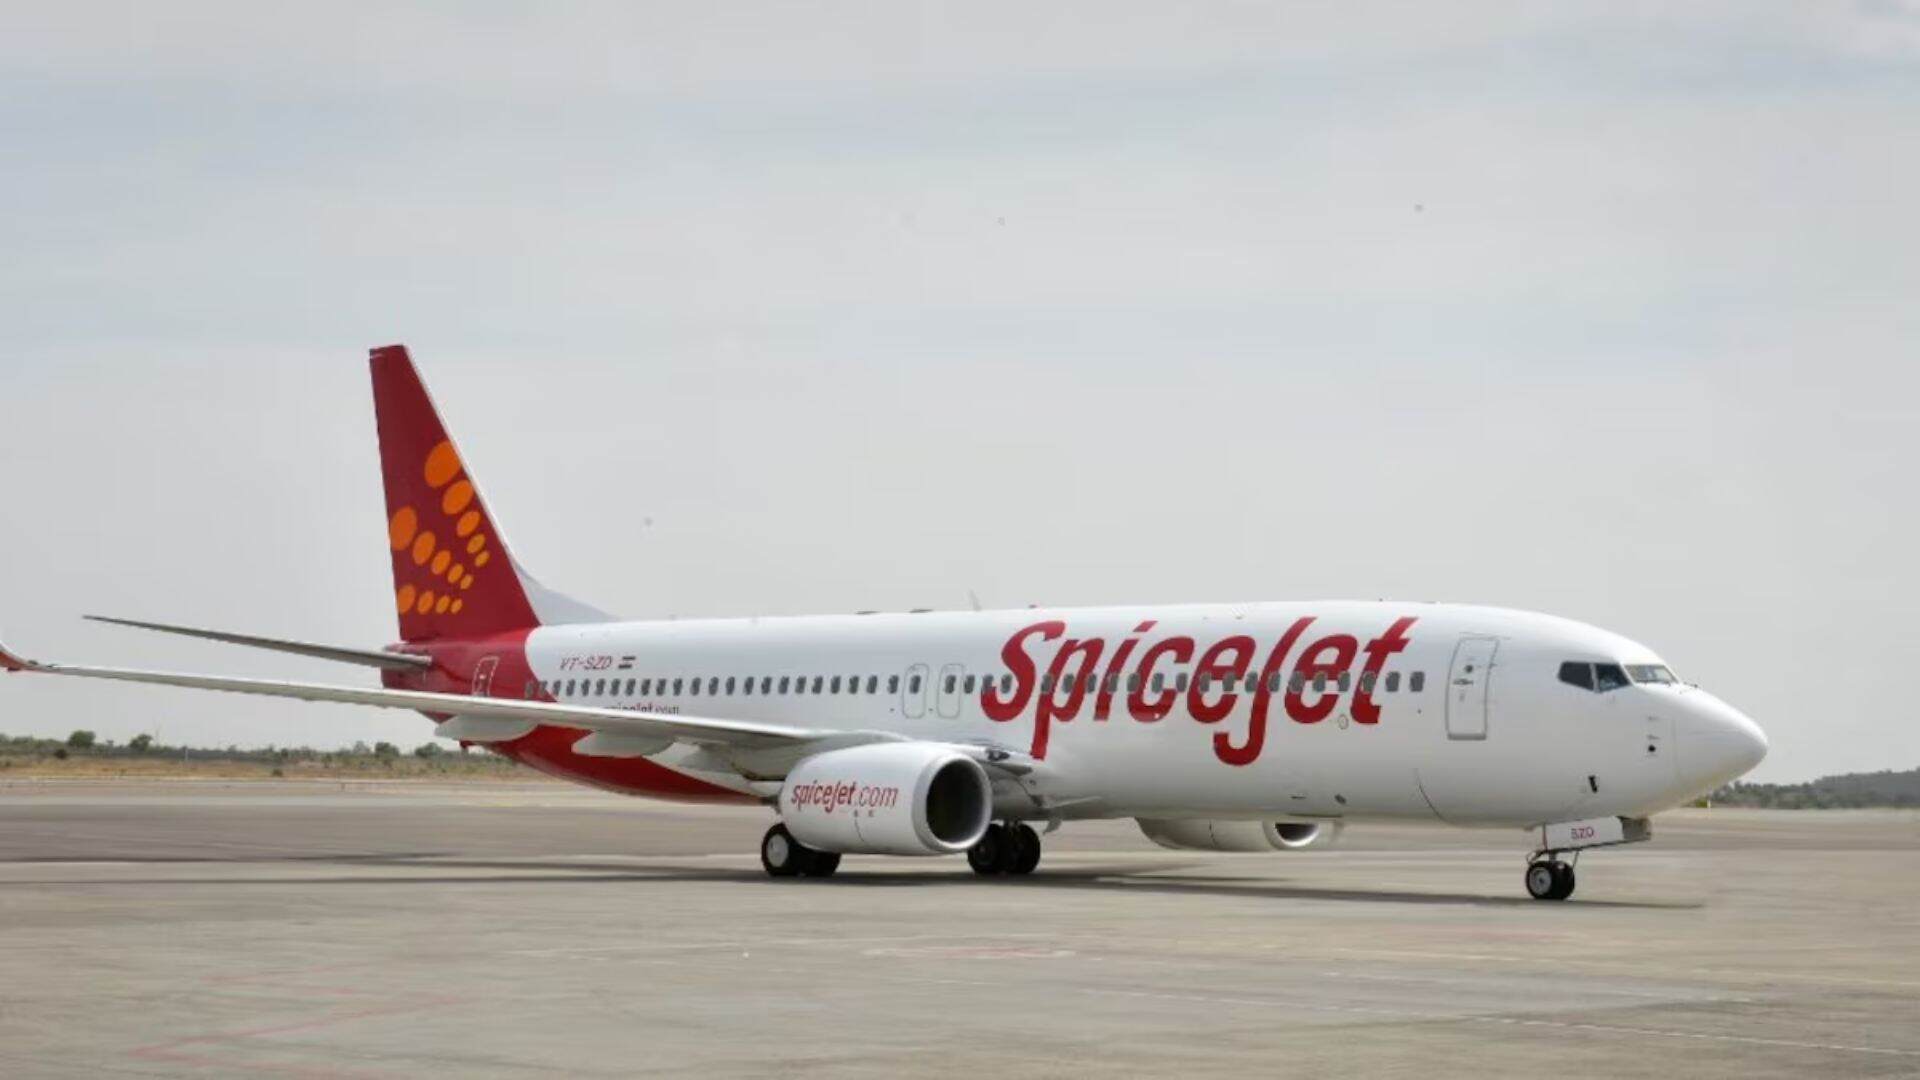 SpiceJet Flight SG 486: Why Were Passengers Left Without AC Amid The Heatwave? Are Several Similar Incidents Being Overlooked?